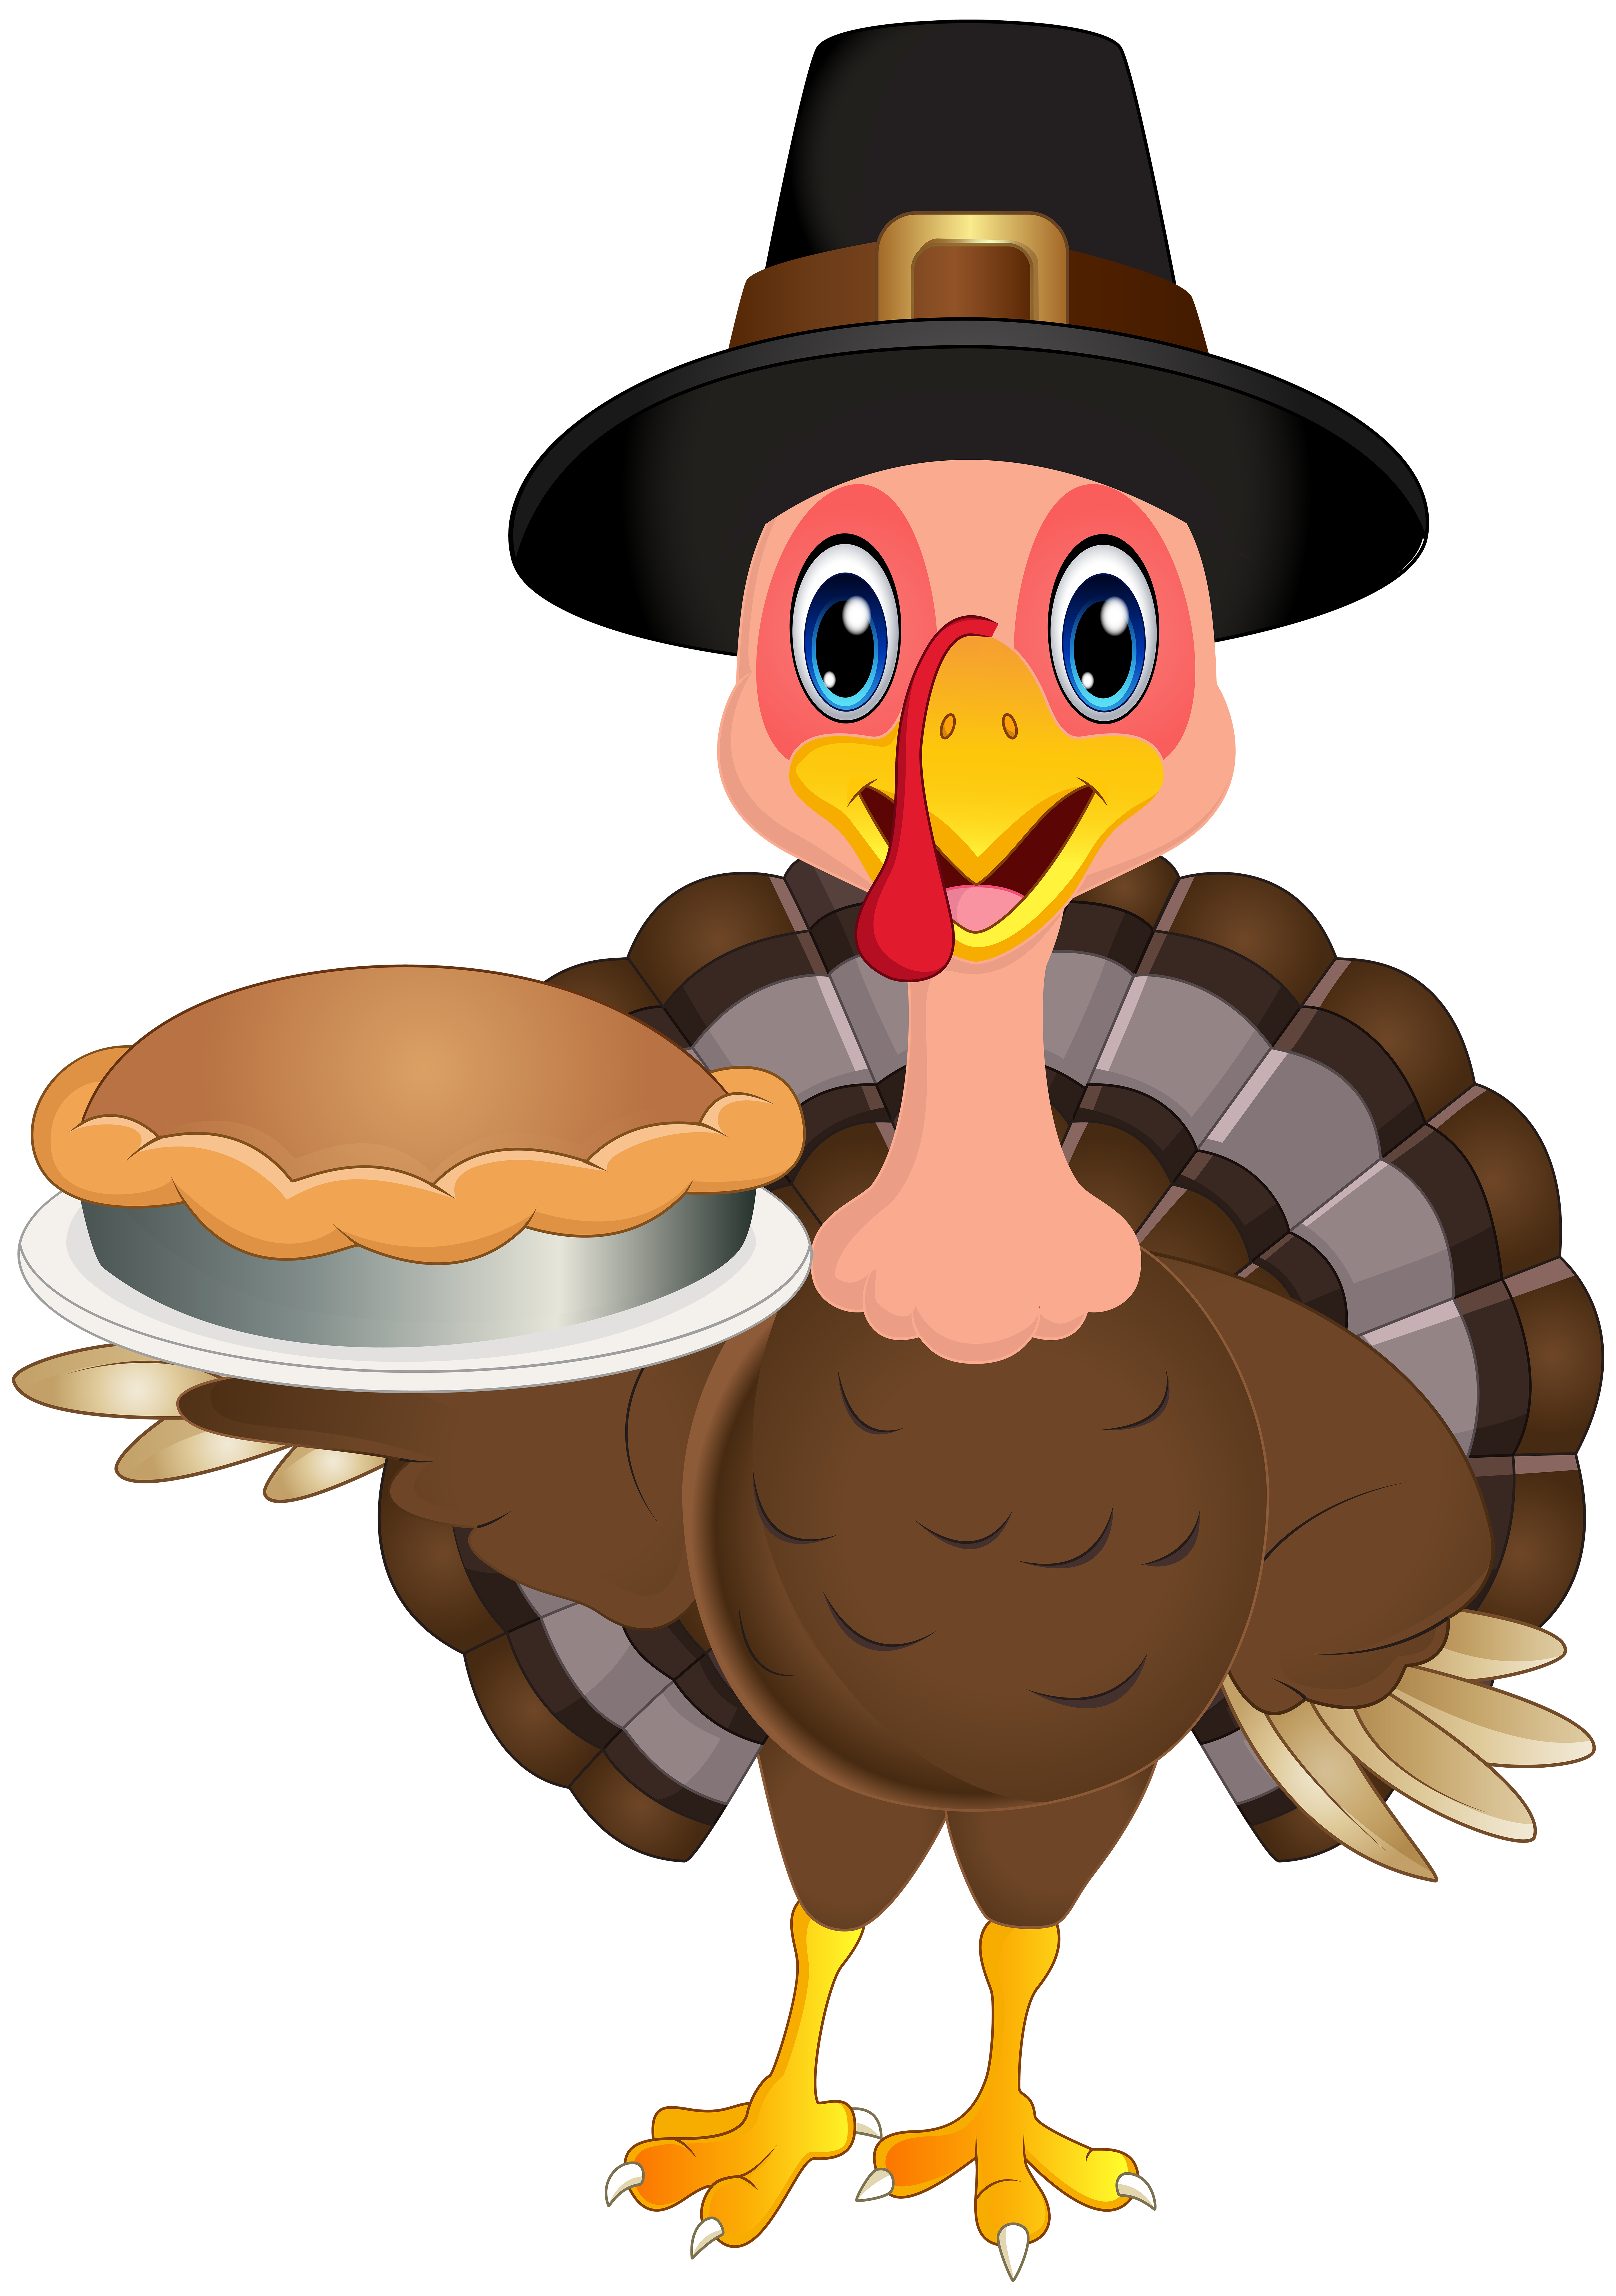 Thanksgiving Cute Turkey PNG Clip Art Image | Gallery ...